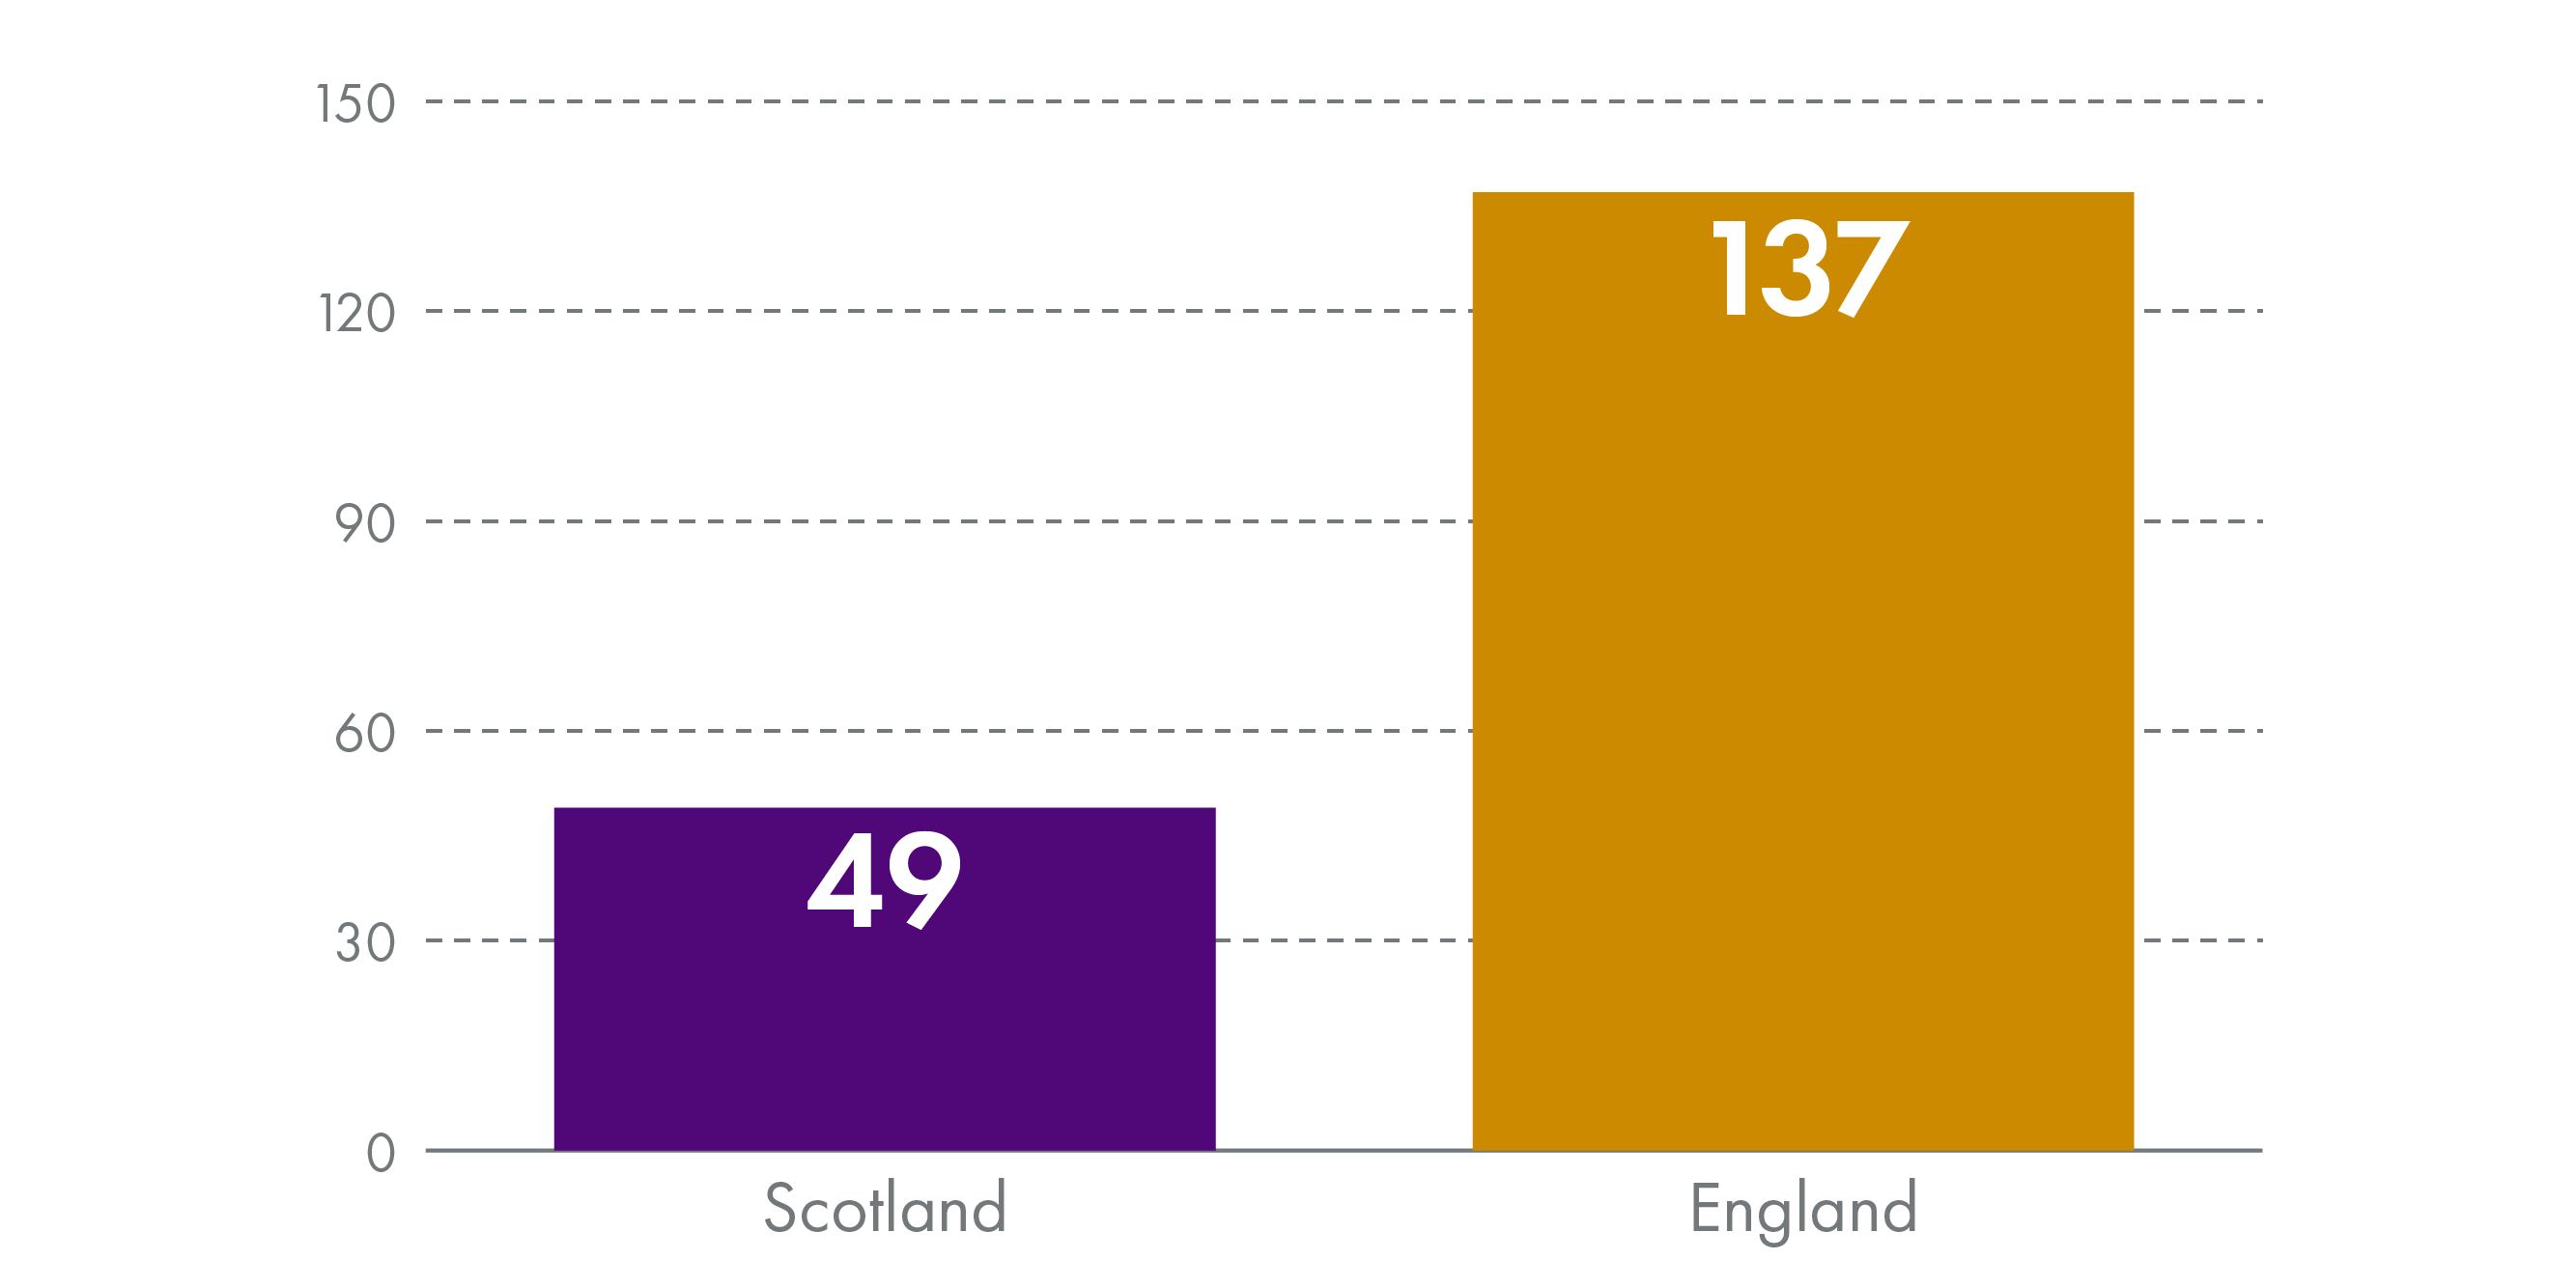 Bar chart showing that 49 people in Scotland and 137 people in England were treated by the National Gambling Treatment Service in 2020-21 per million population.